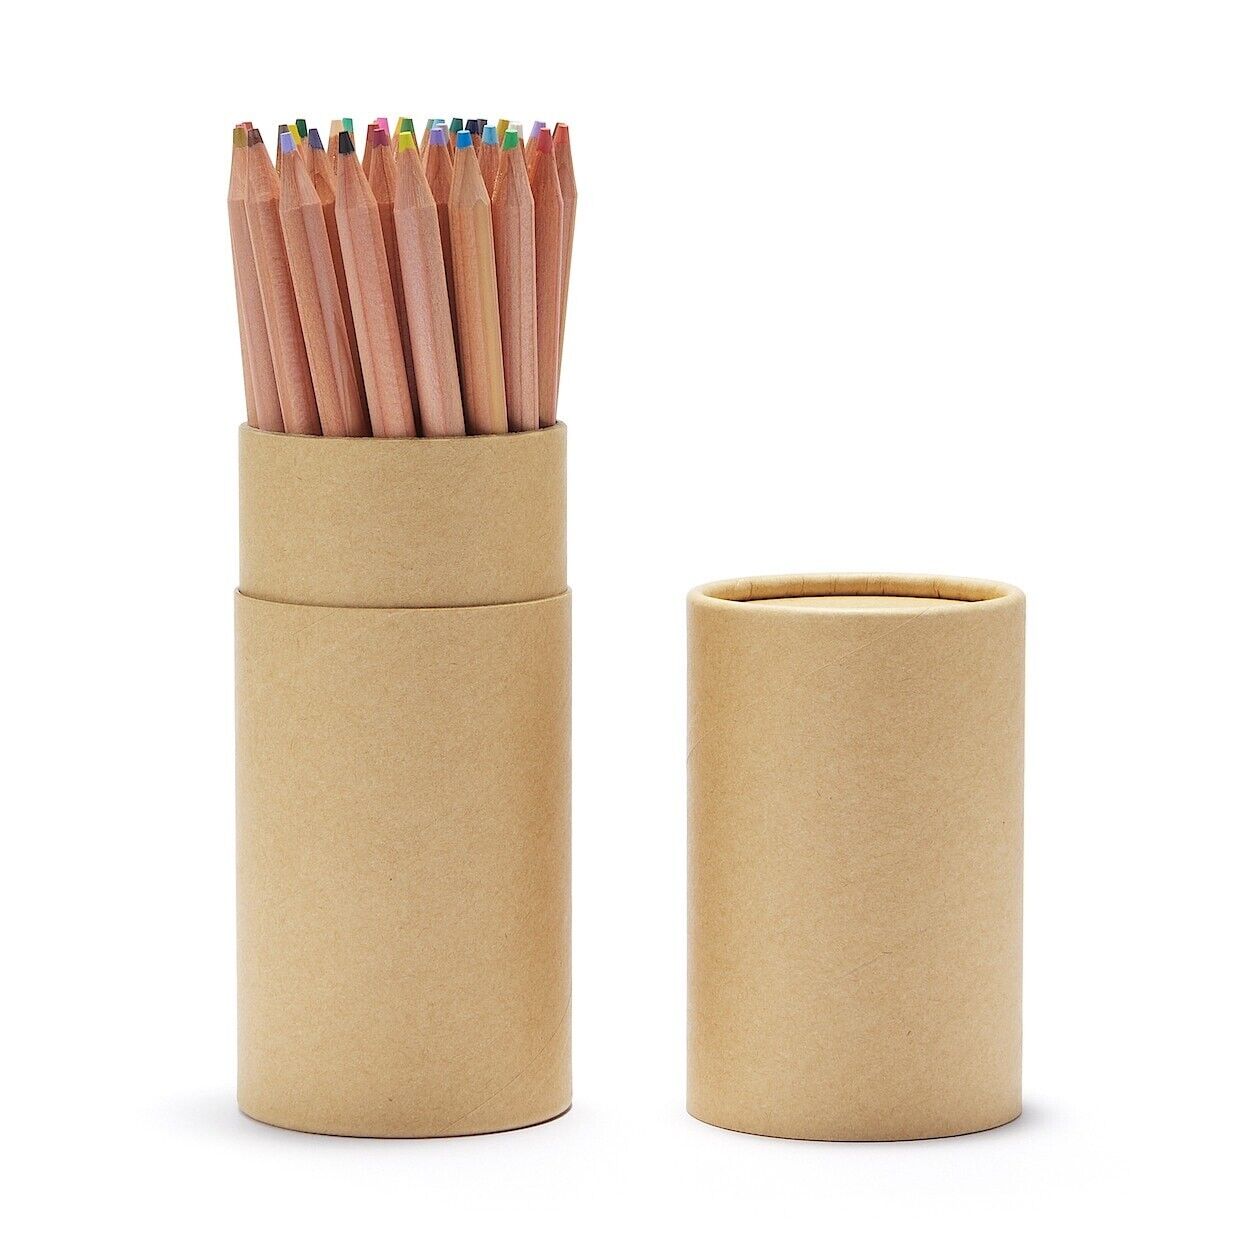 MUJI Color pencils 36 colors In a paper tube case Made in Japan